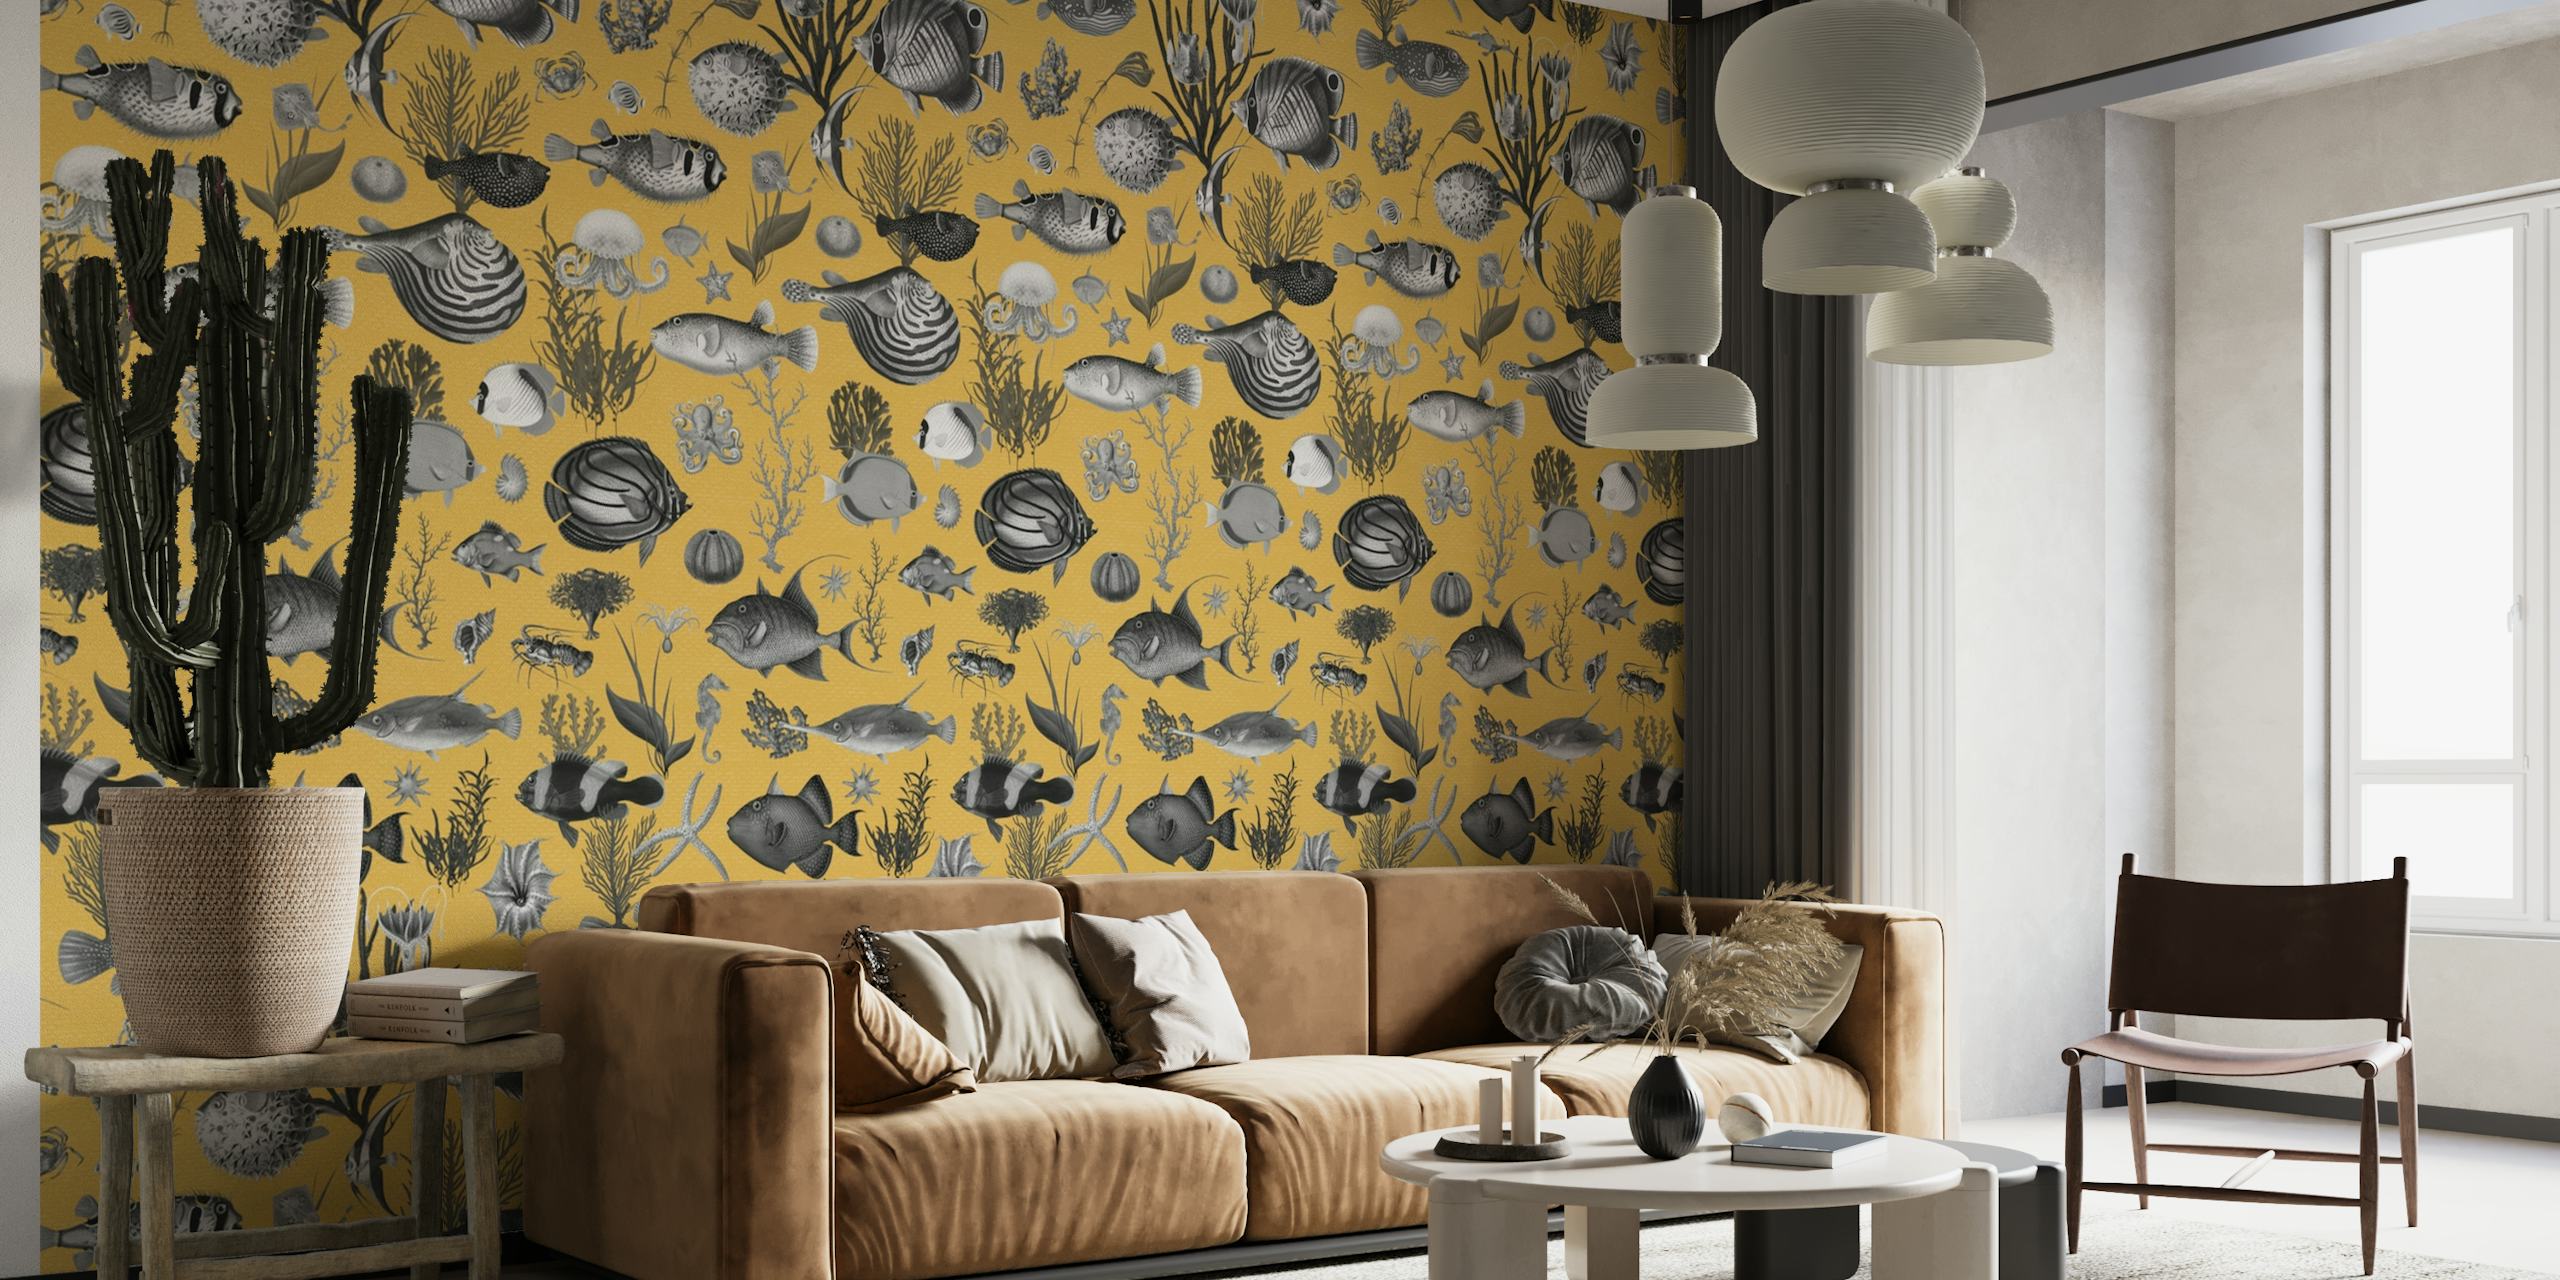 Grey and mustard ocean-themed wall mural with aquatic flora and fauna